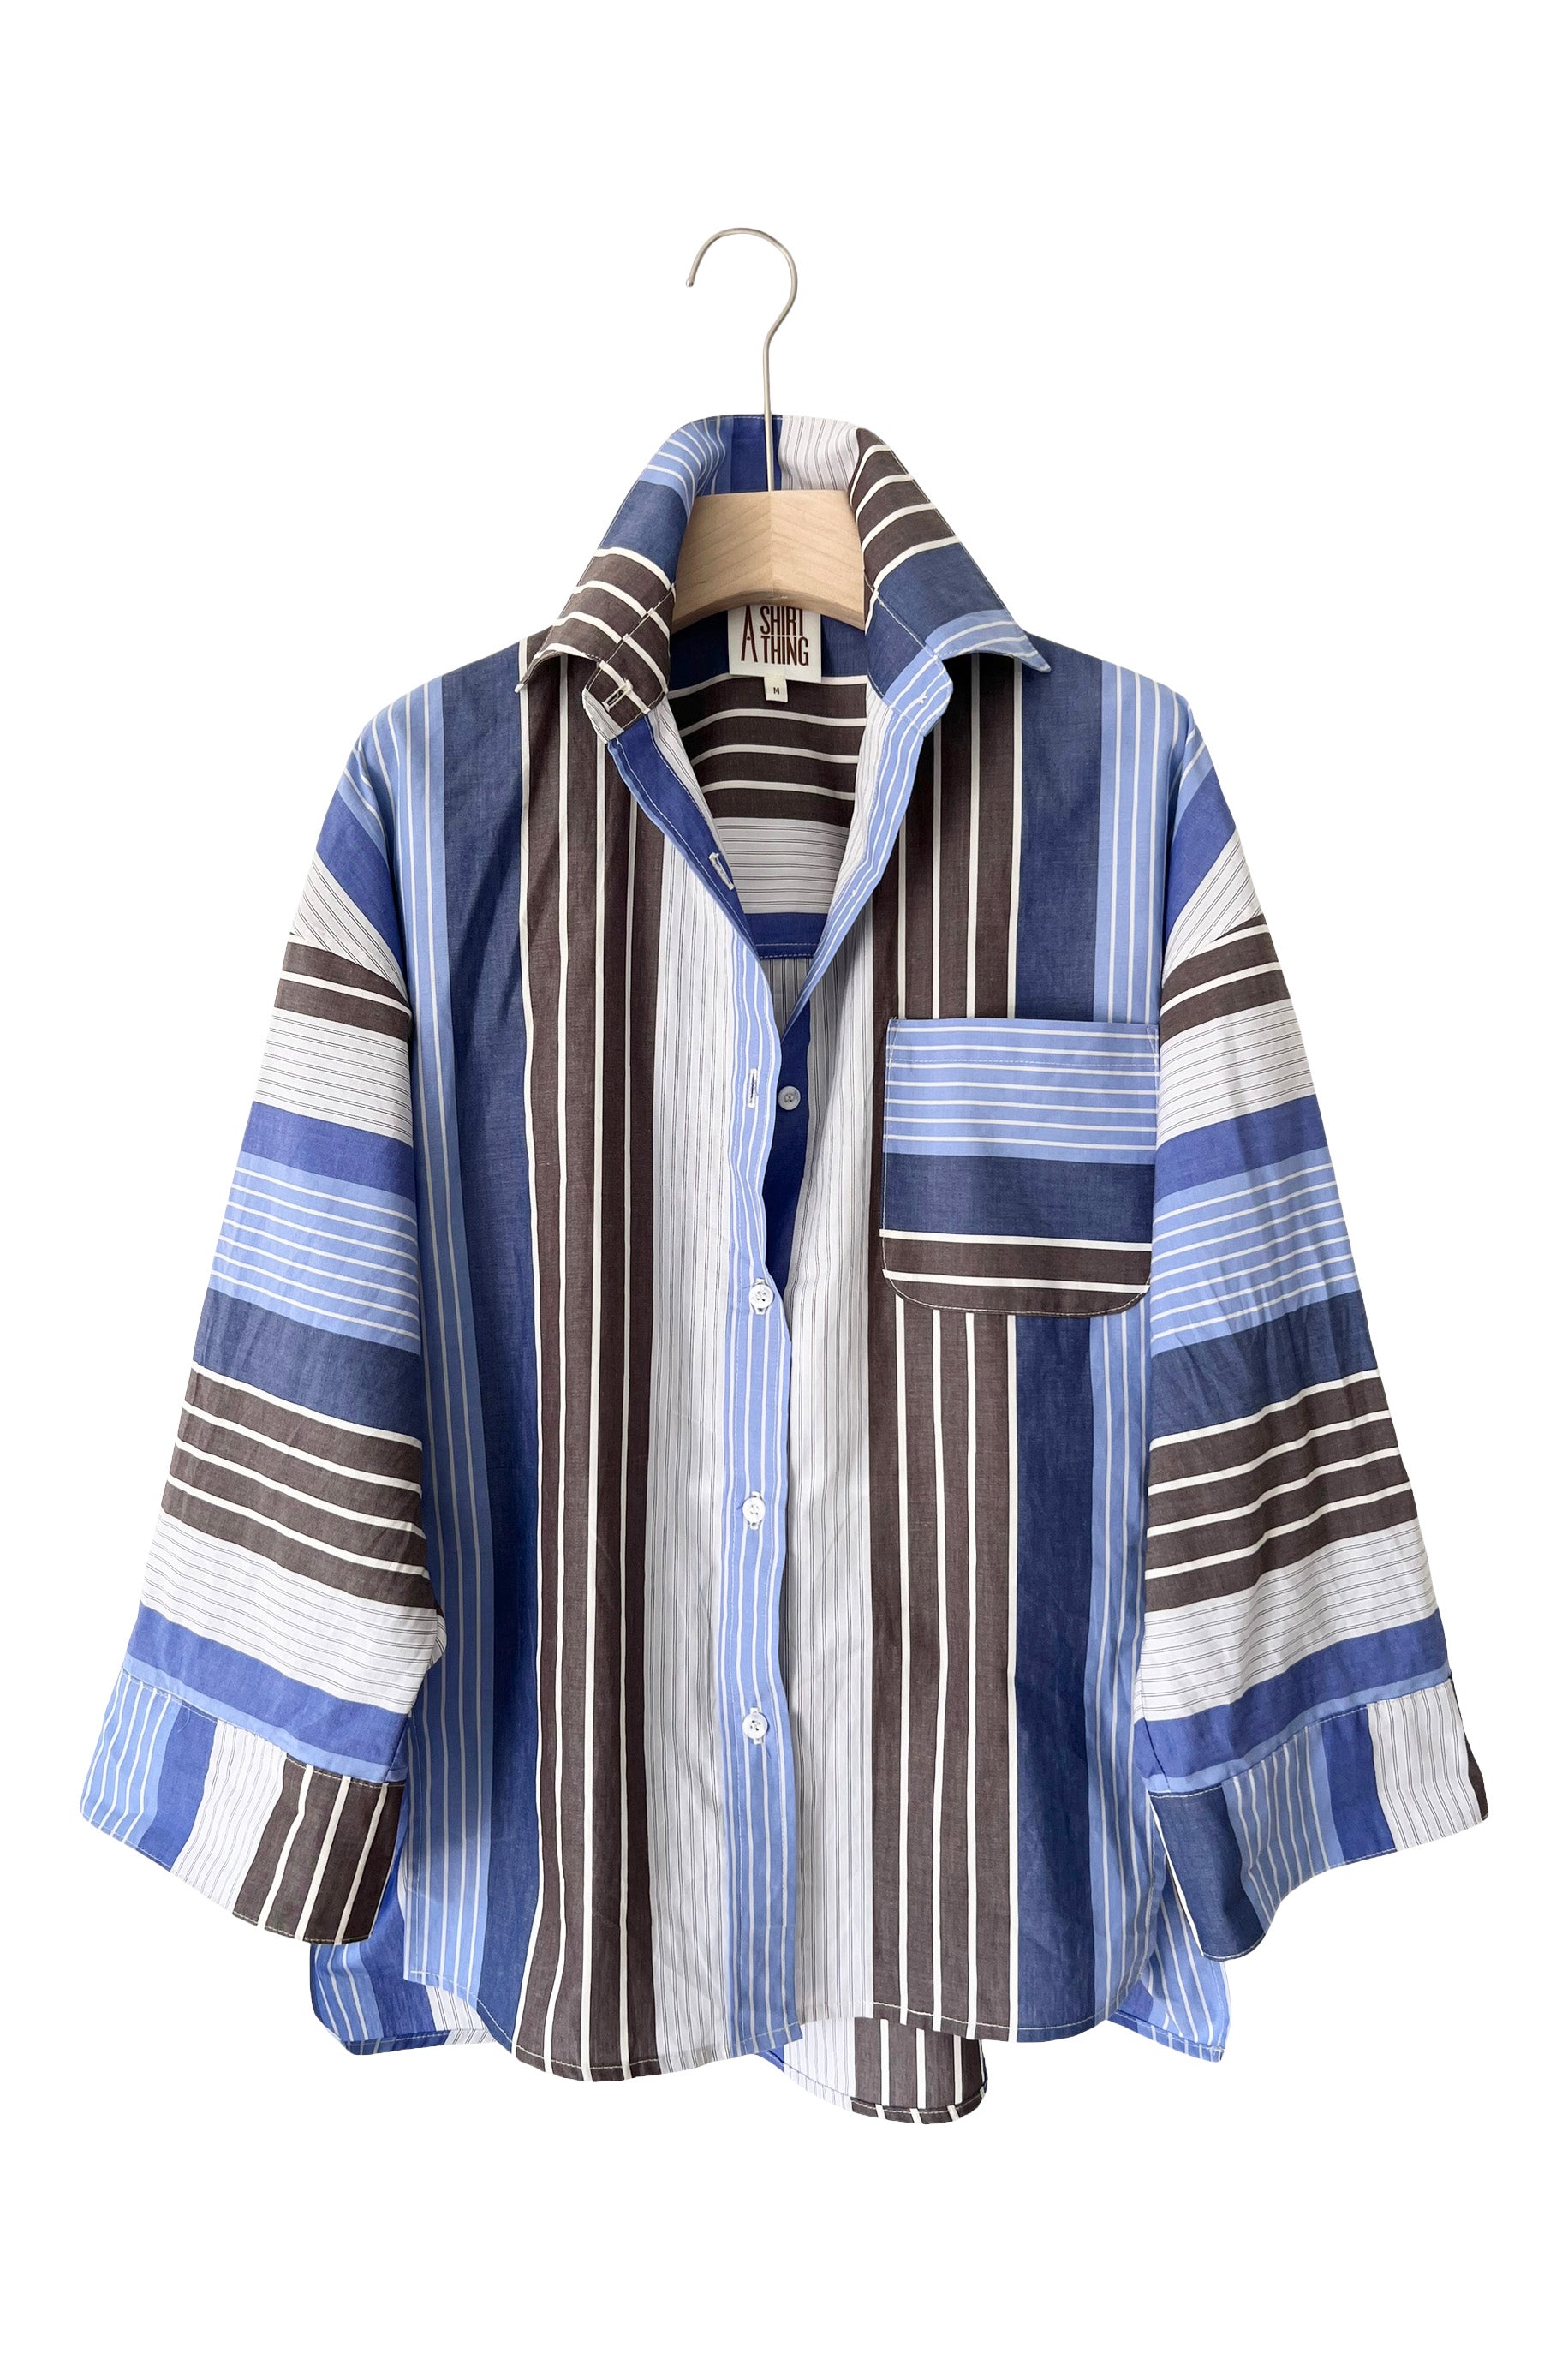 A Shirt Thing Sammy Amalfi Stripe Top in Periwinkle